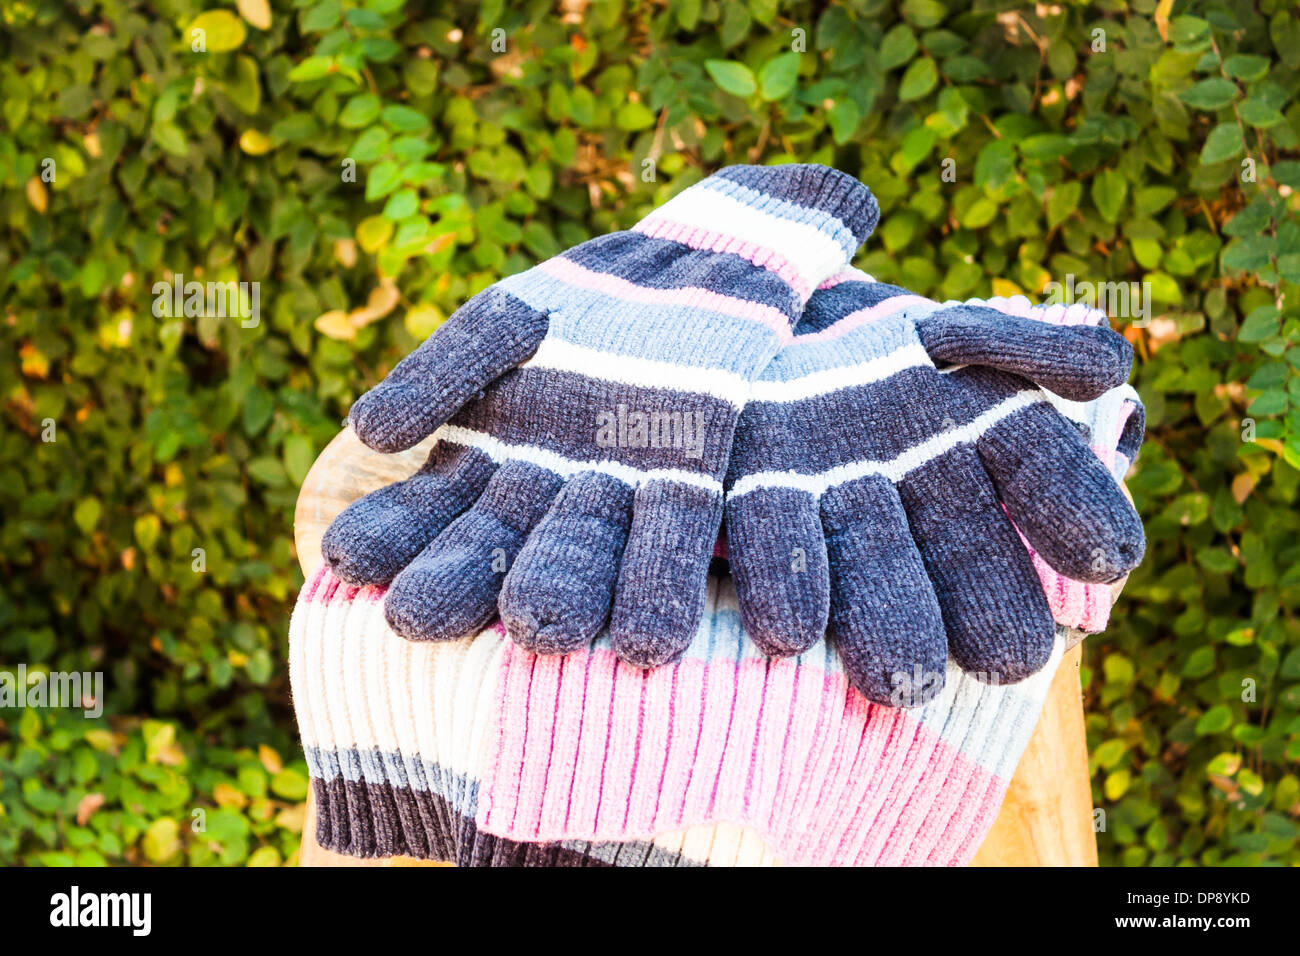 Knit wool gloves and scarf, stock photo Stock Photo